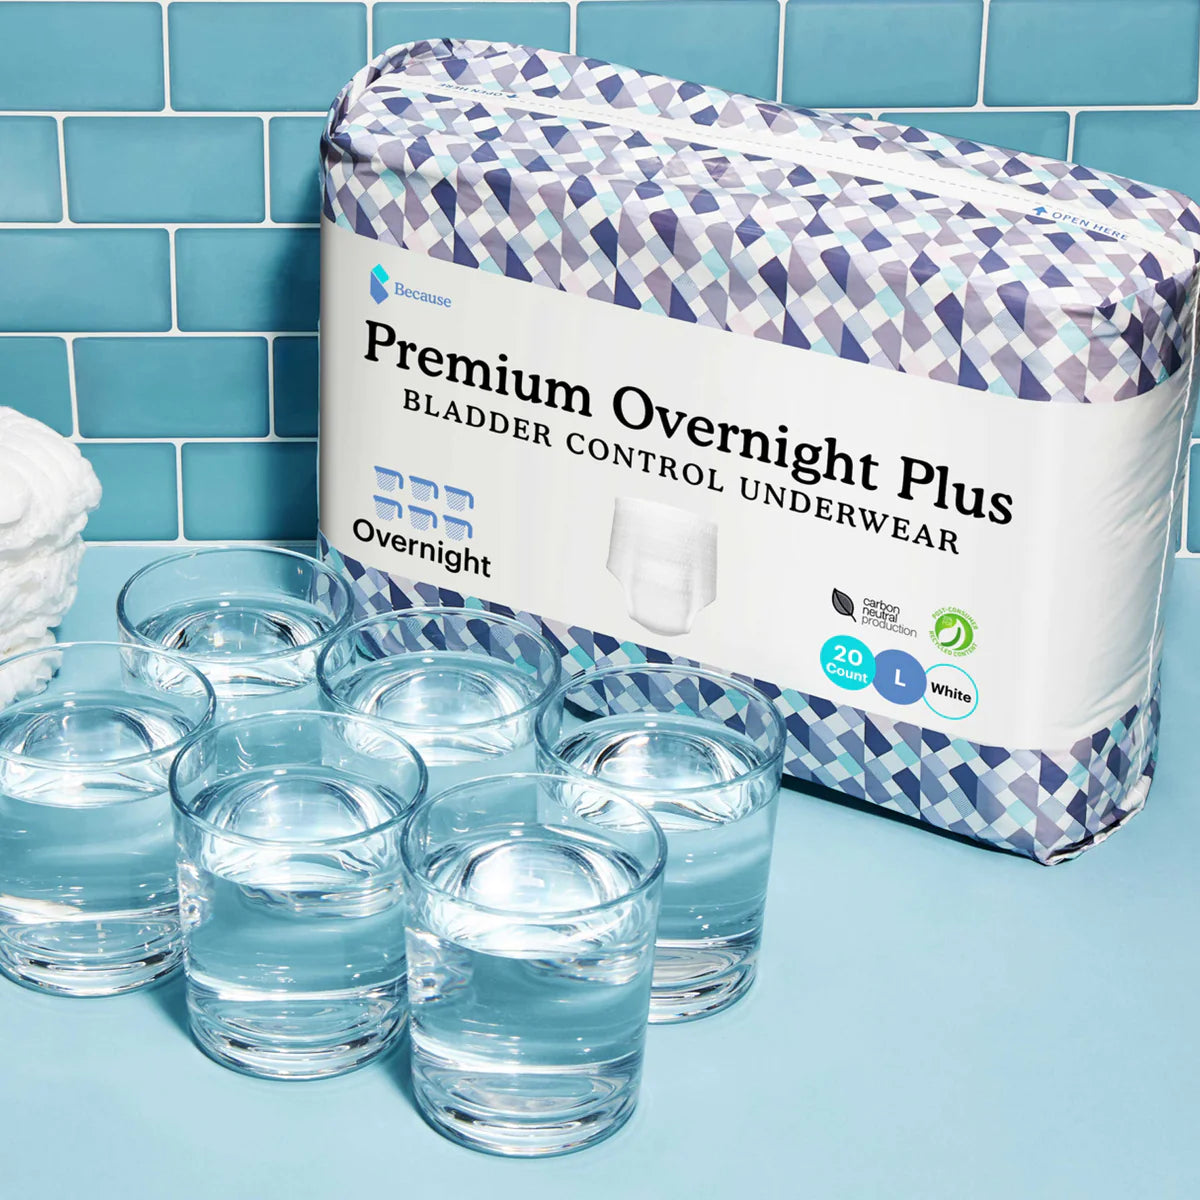 Premium overnight plus underwear holds up to 6 cups